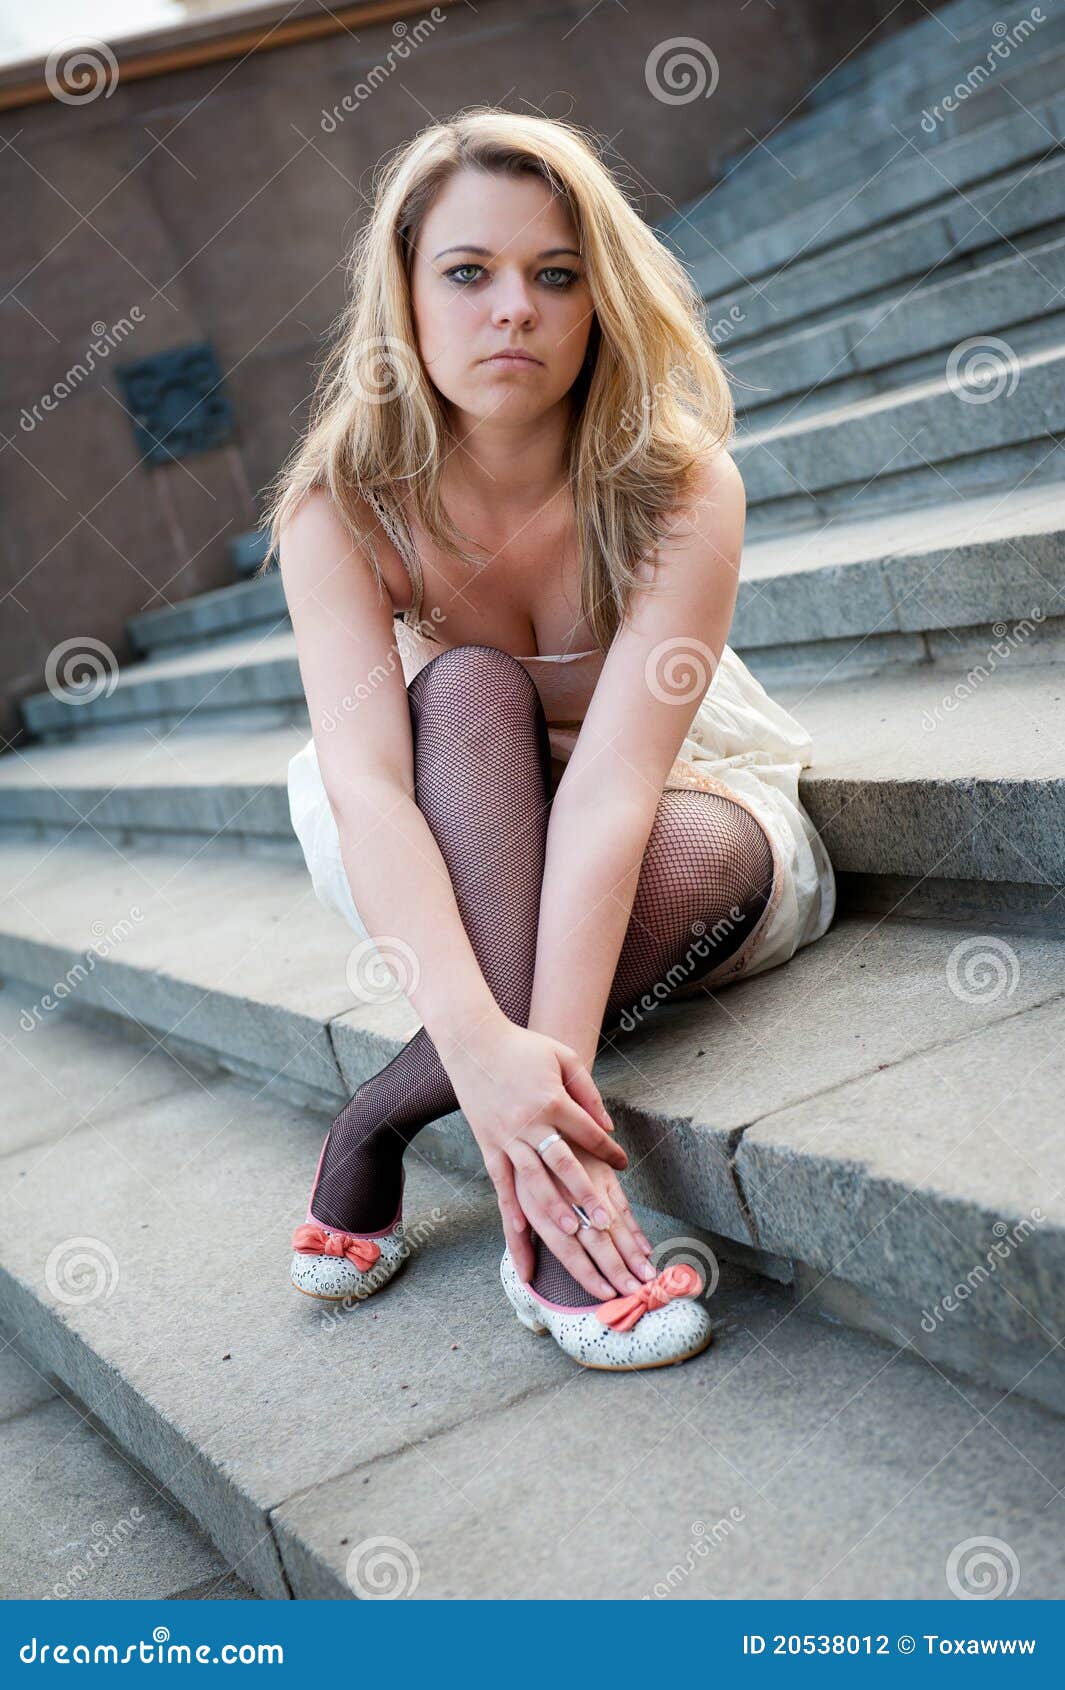 Sad lonely girl sitting stock photo. Image of lady, pretty - 20538012